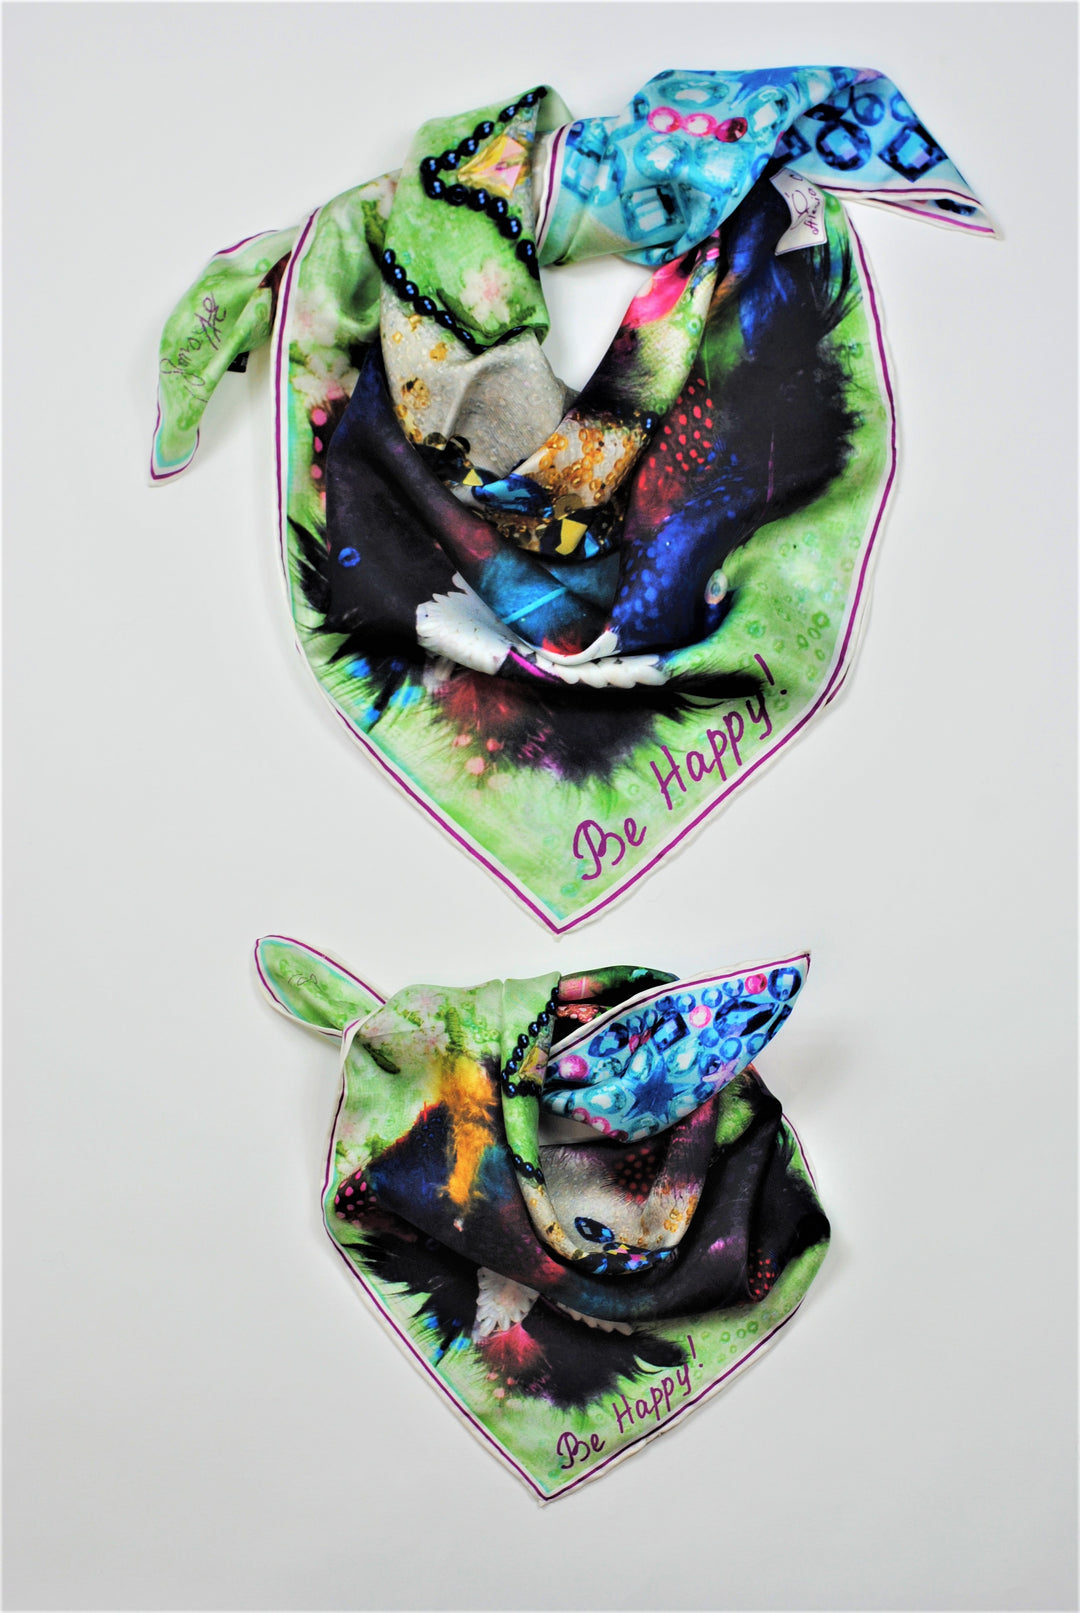 Best Gift For her BE HAPPY Wearable Art Pure Silk Scarf Bird Of happiness Bright 100% Silk Shawl by Chicago Fashion Designer Alesia Chaika